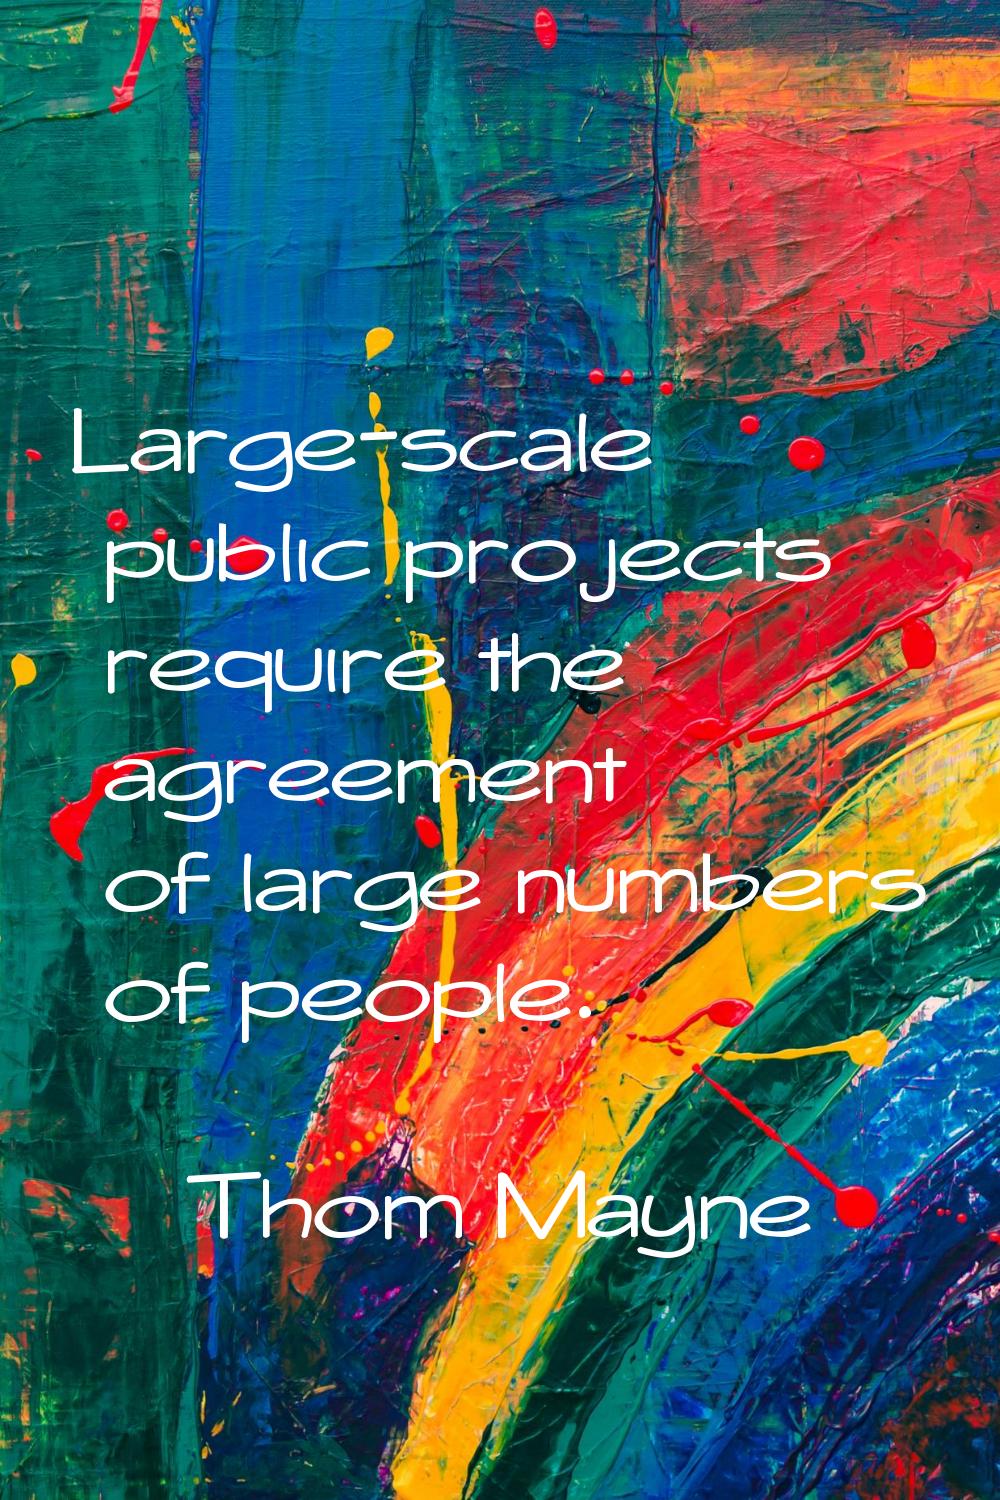 Large-scale public projects require the agreement of large numbers of people.